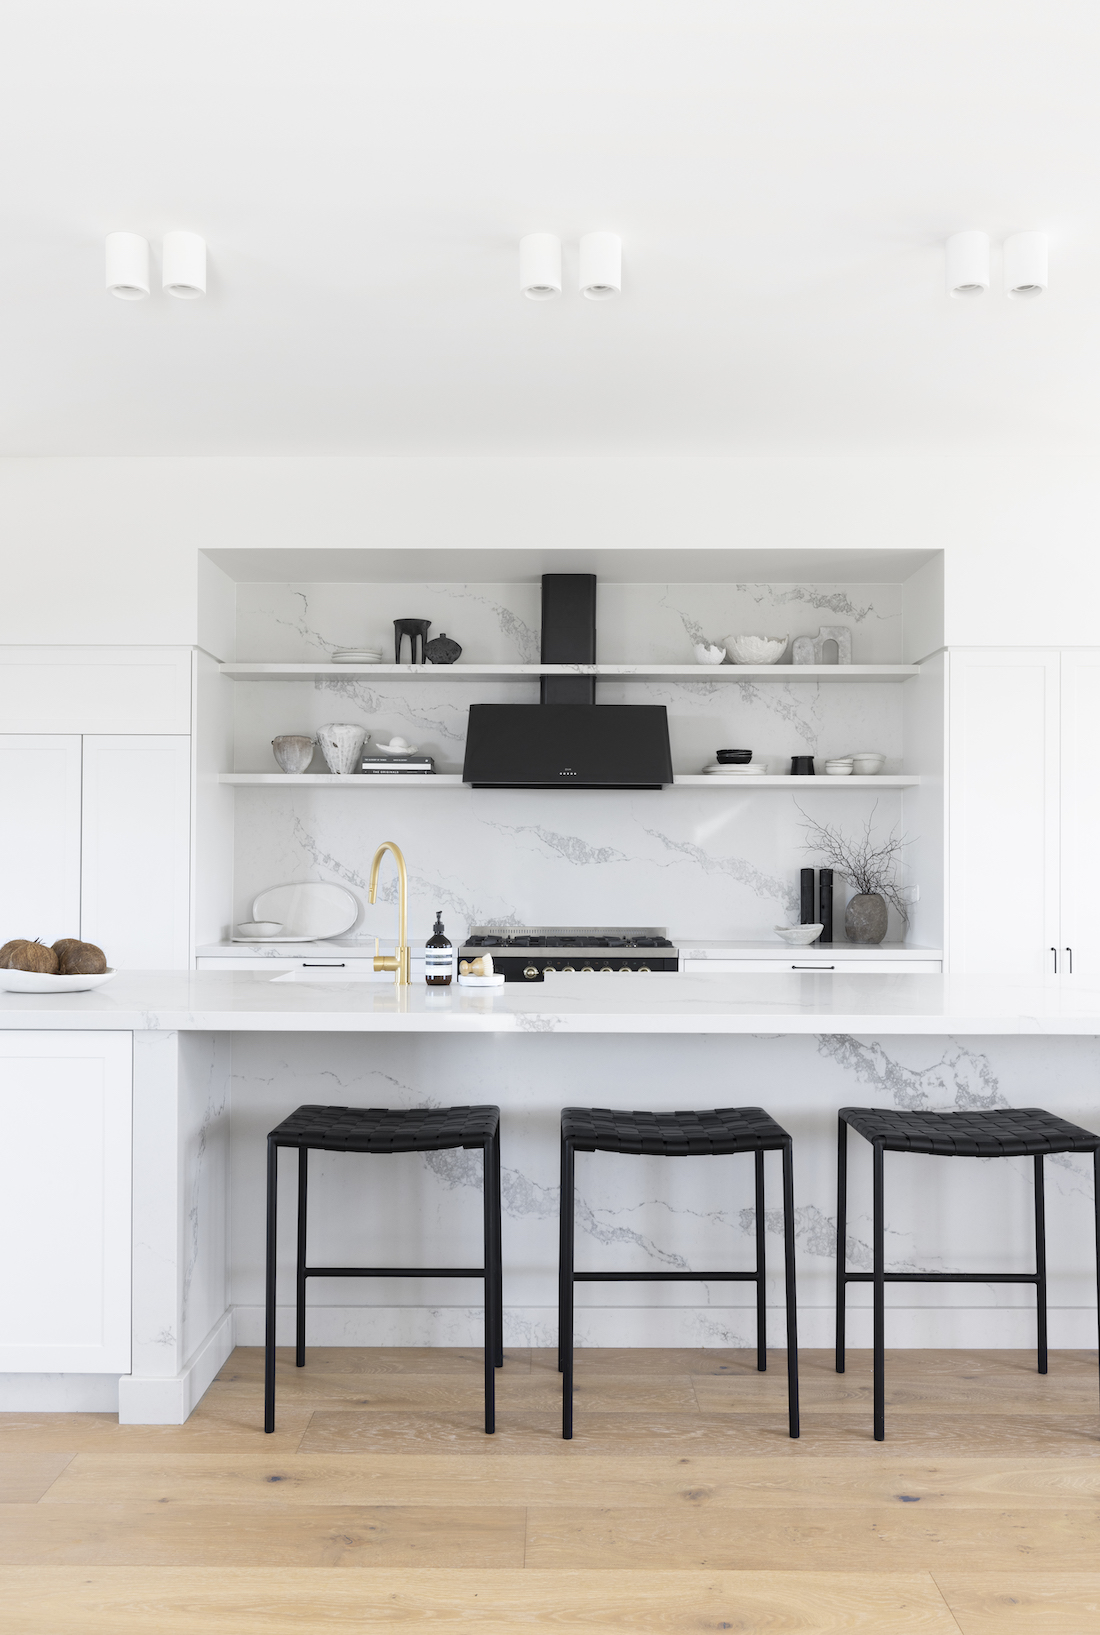 Black bar stools in grey and white kitchen from Studio Haus Co